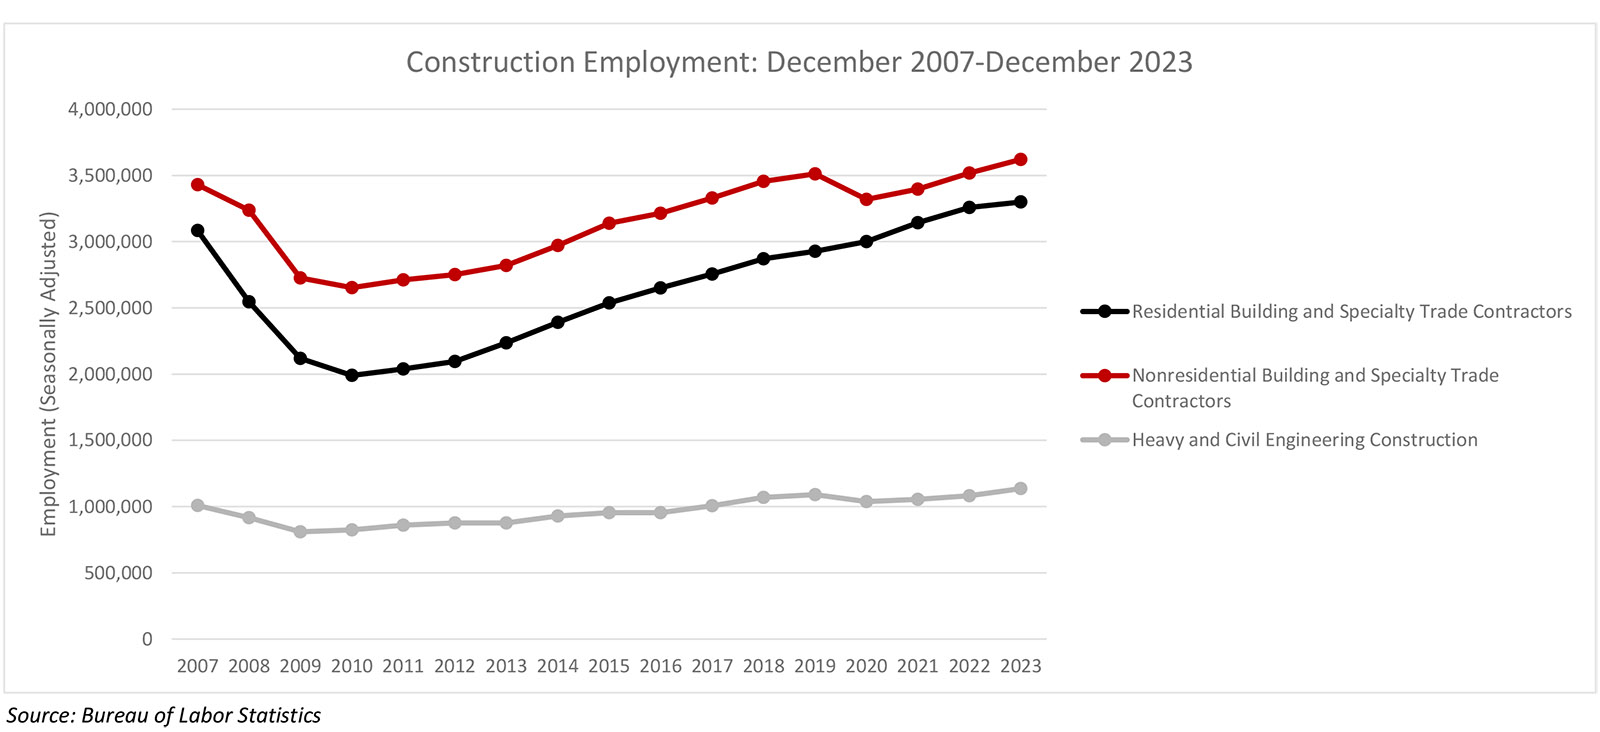 Nonresidential Construction Increases in December